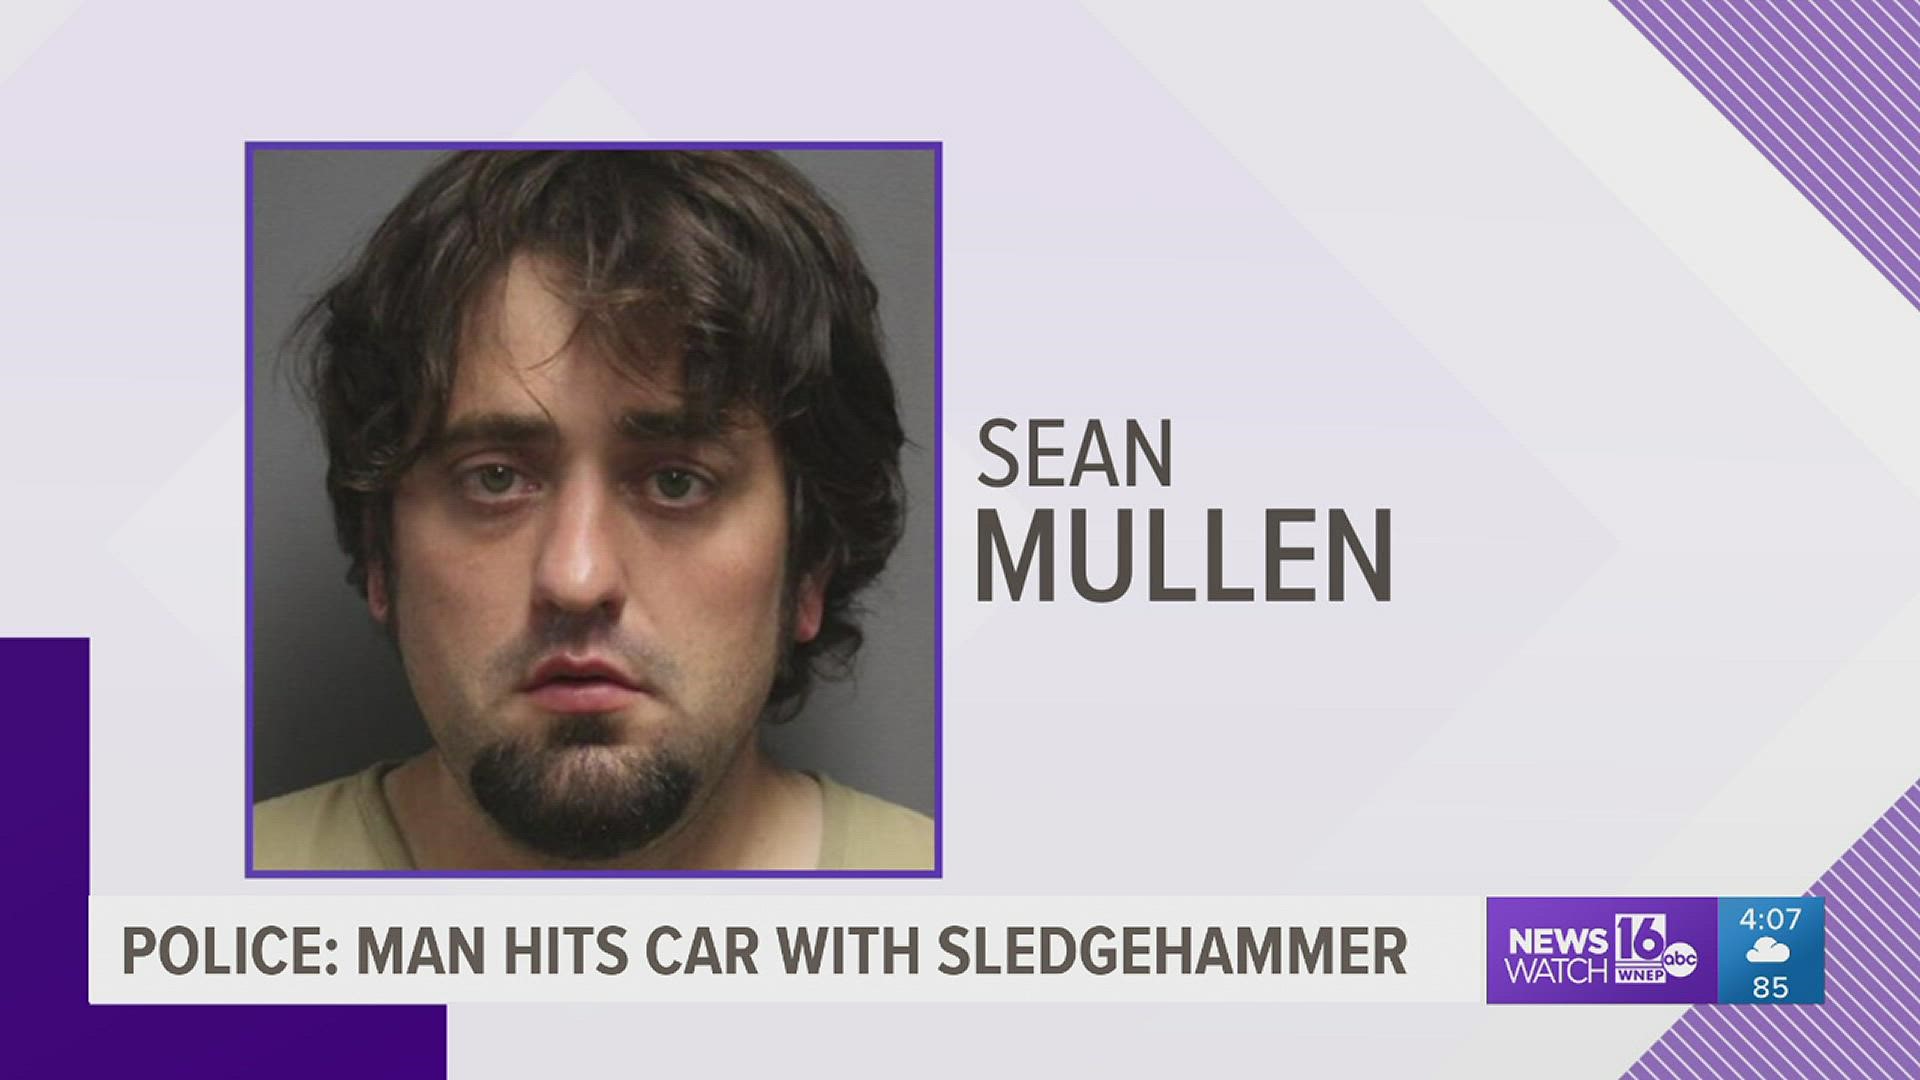 Officers say Sean Mullen made threats to kill two people during a domestic dispute.